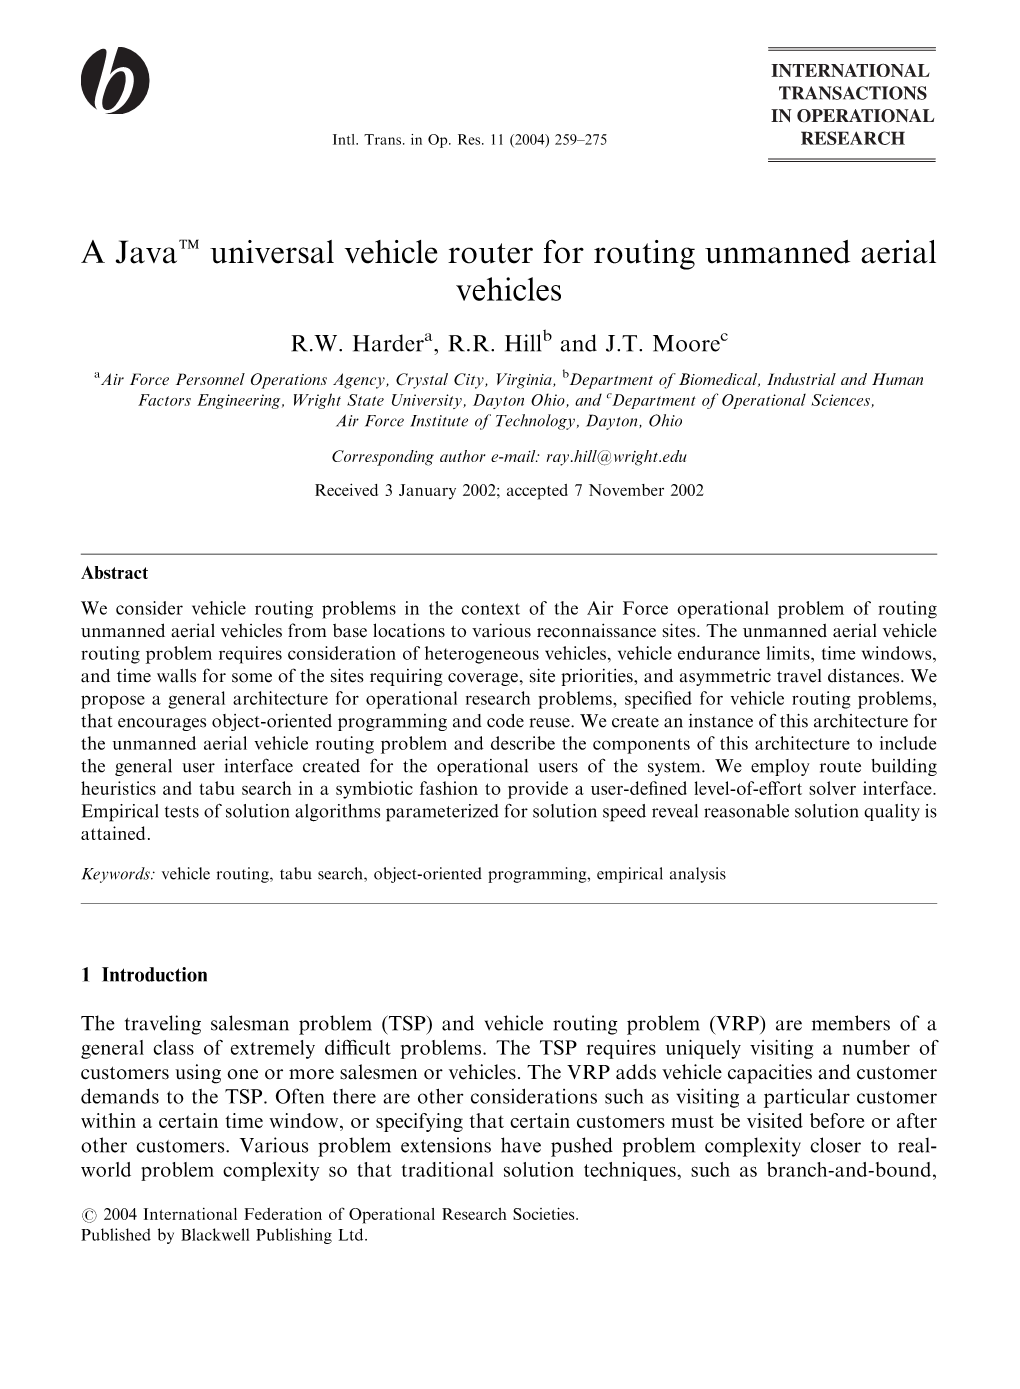 Read This Paper on Vehicle Routing